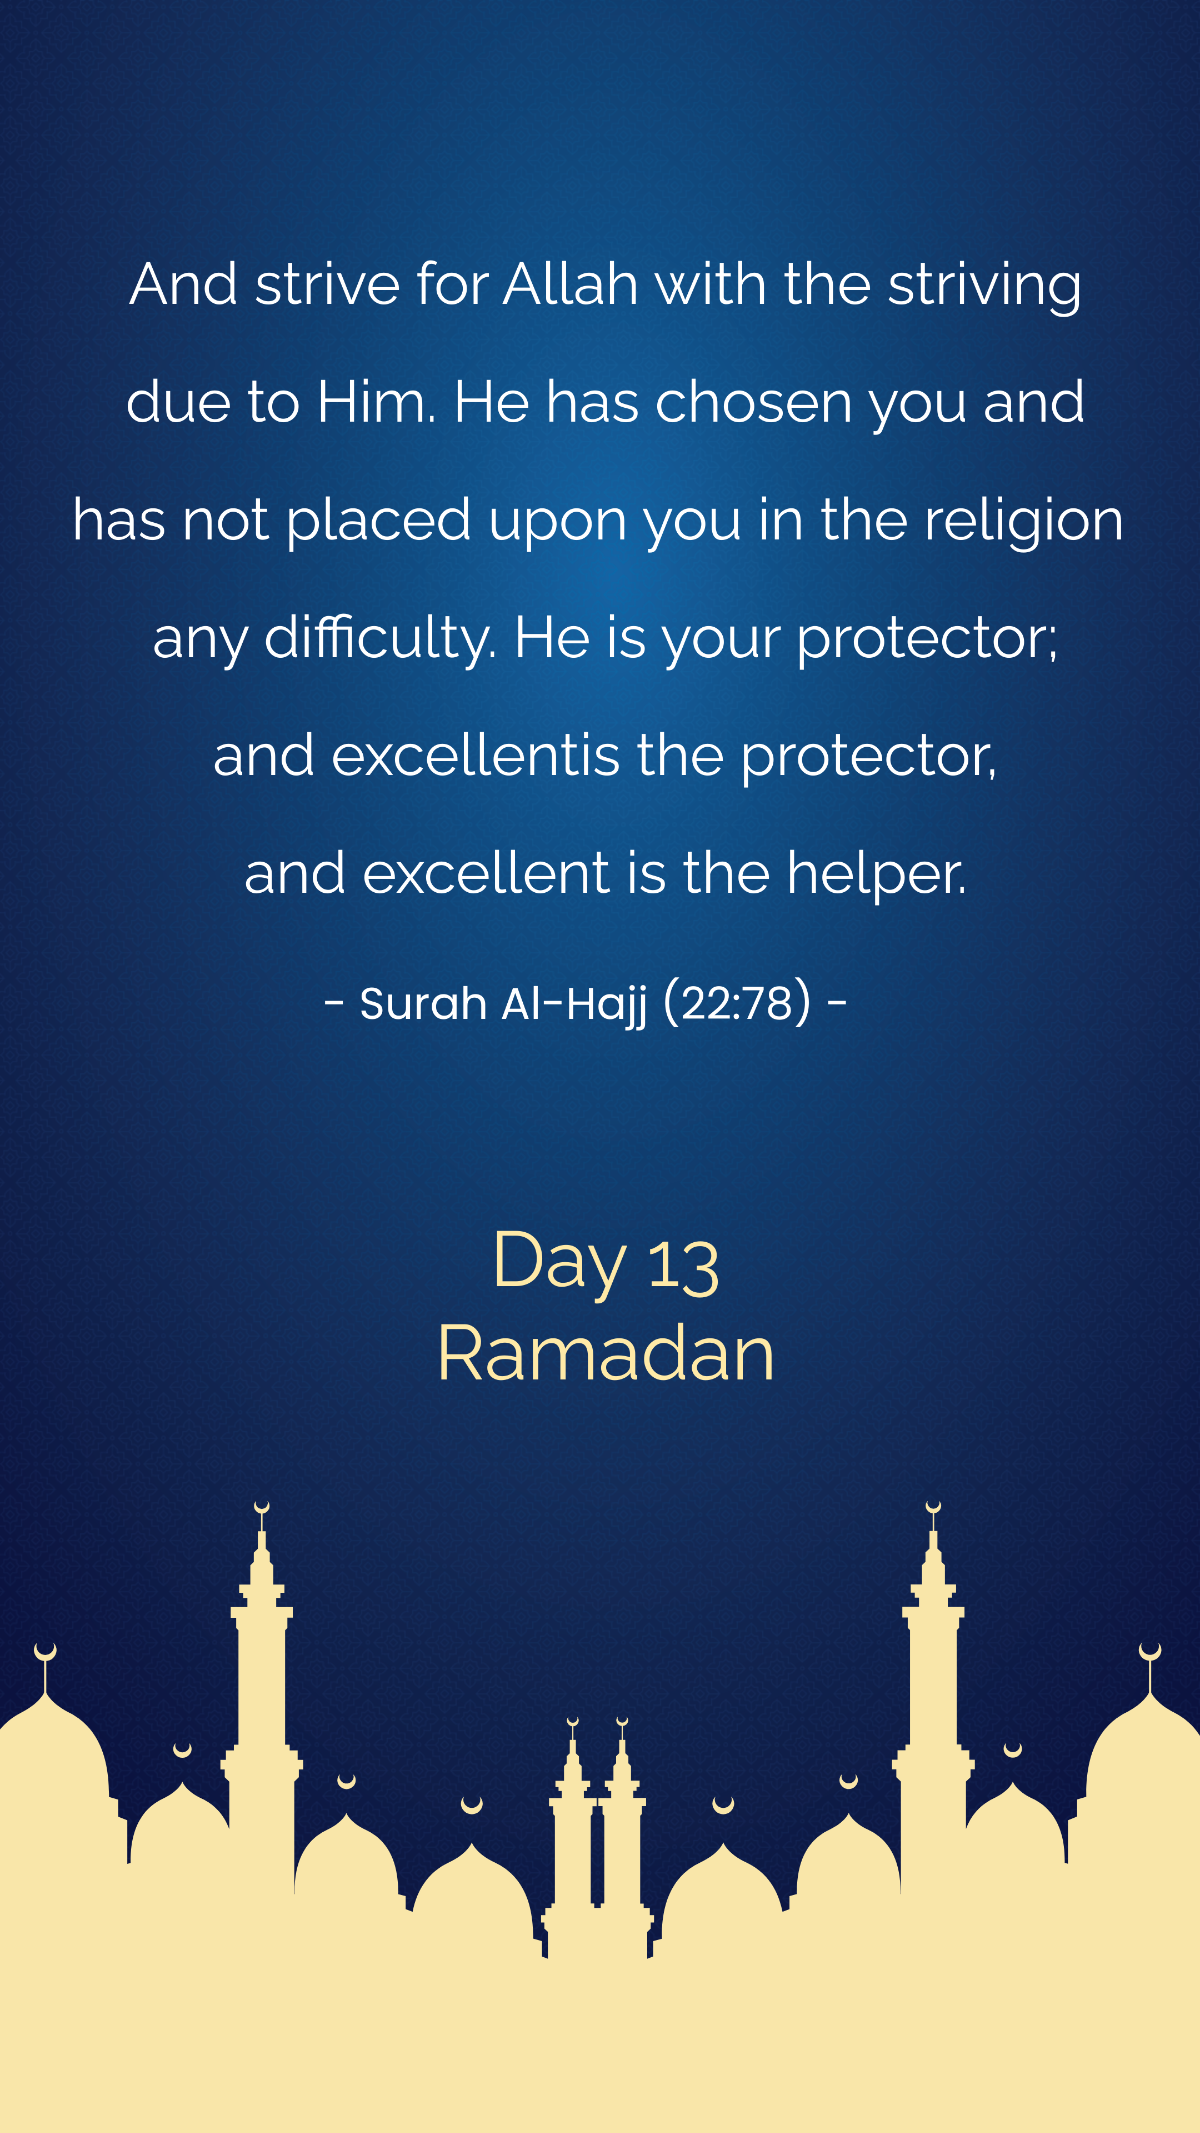 Ramadan Day 13 Quote Template